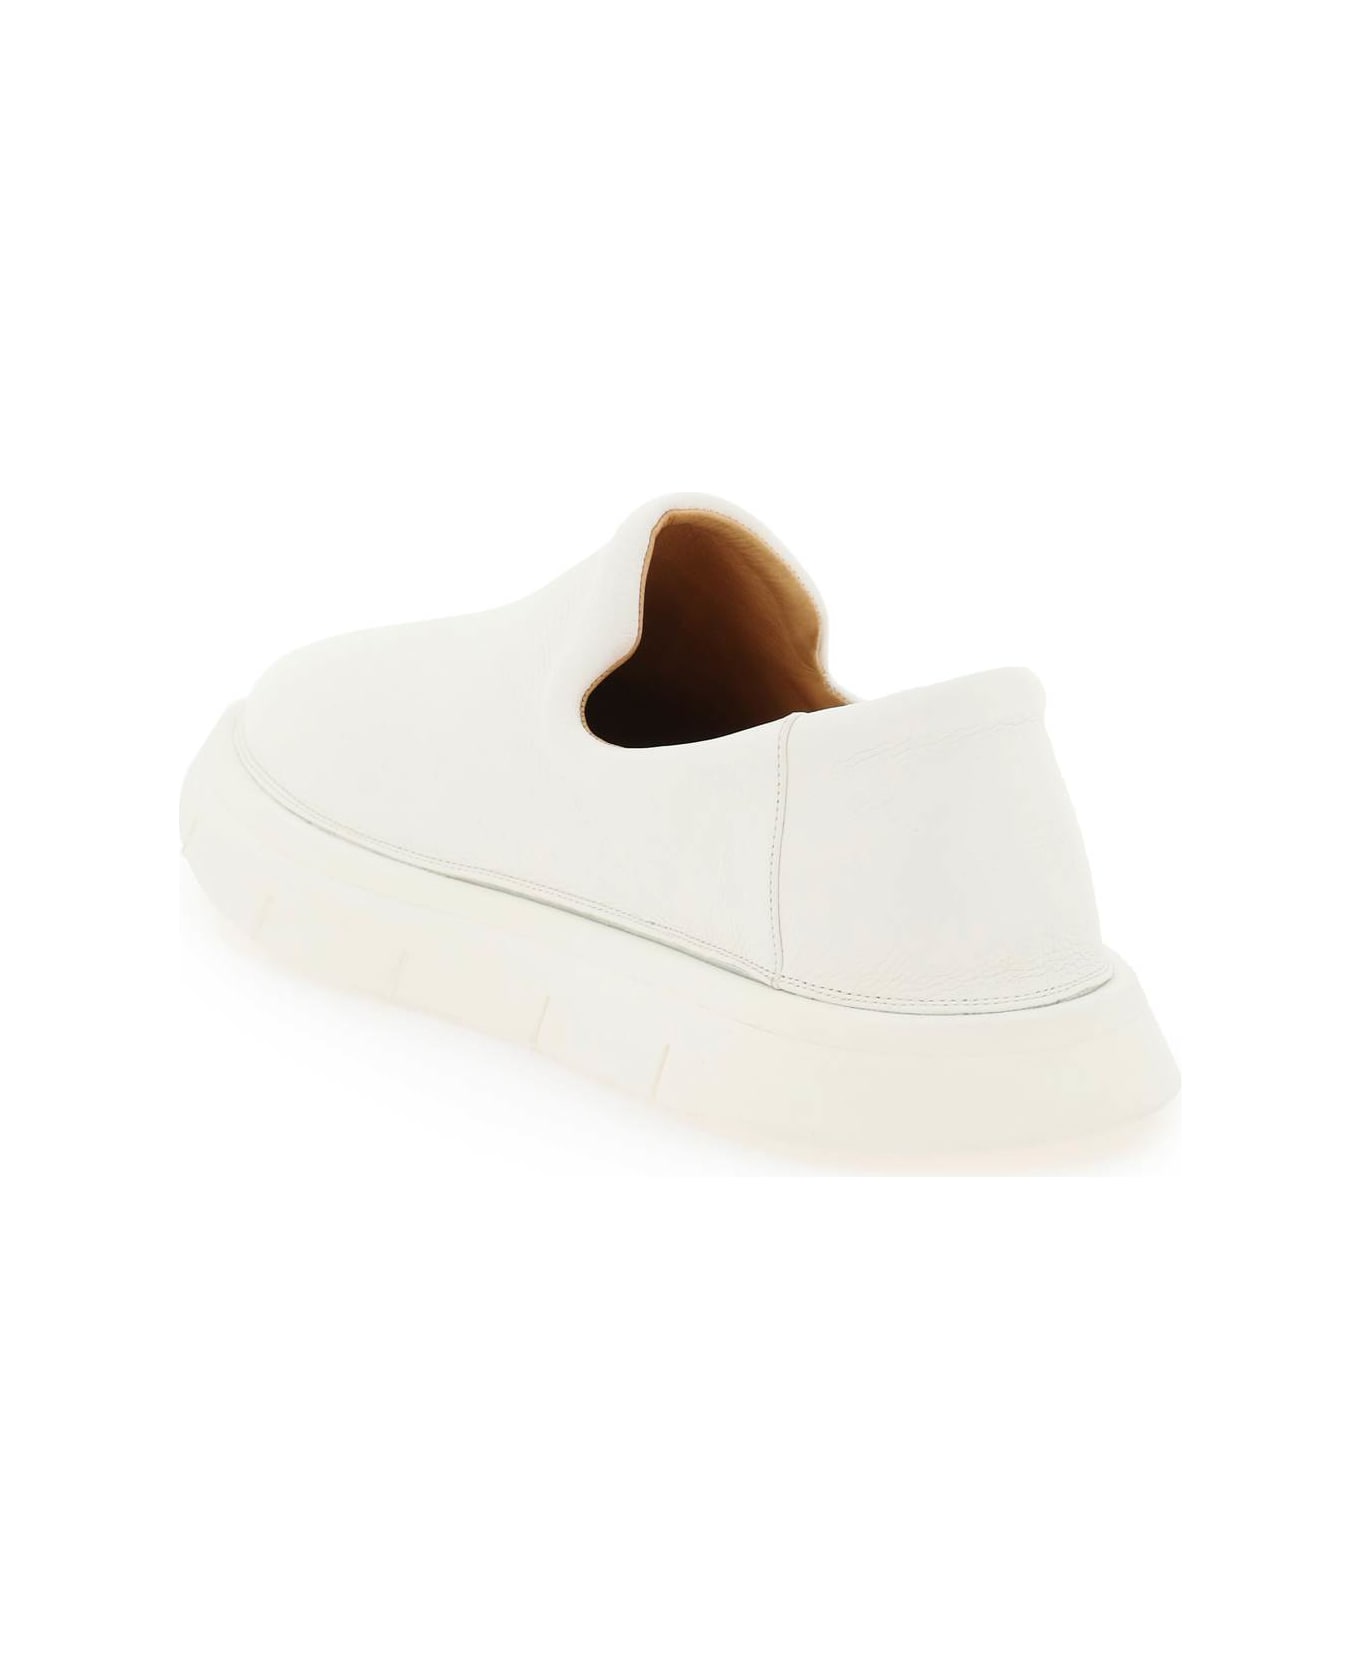 Marsell 'intagliata' Grained Leather Slip-on Shoes - BIANCO OPTICAL (White)